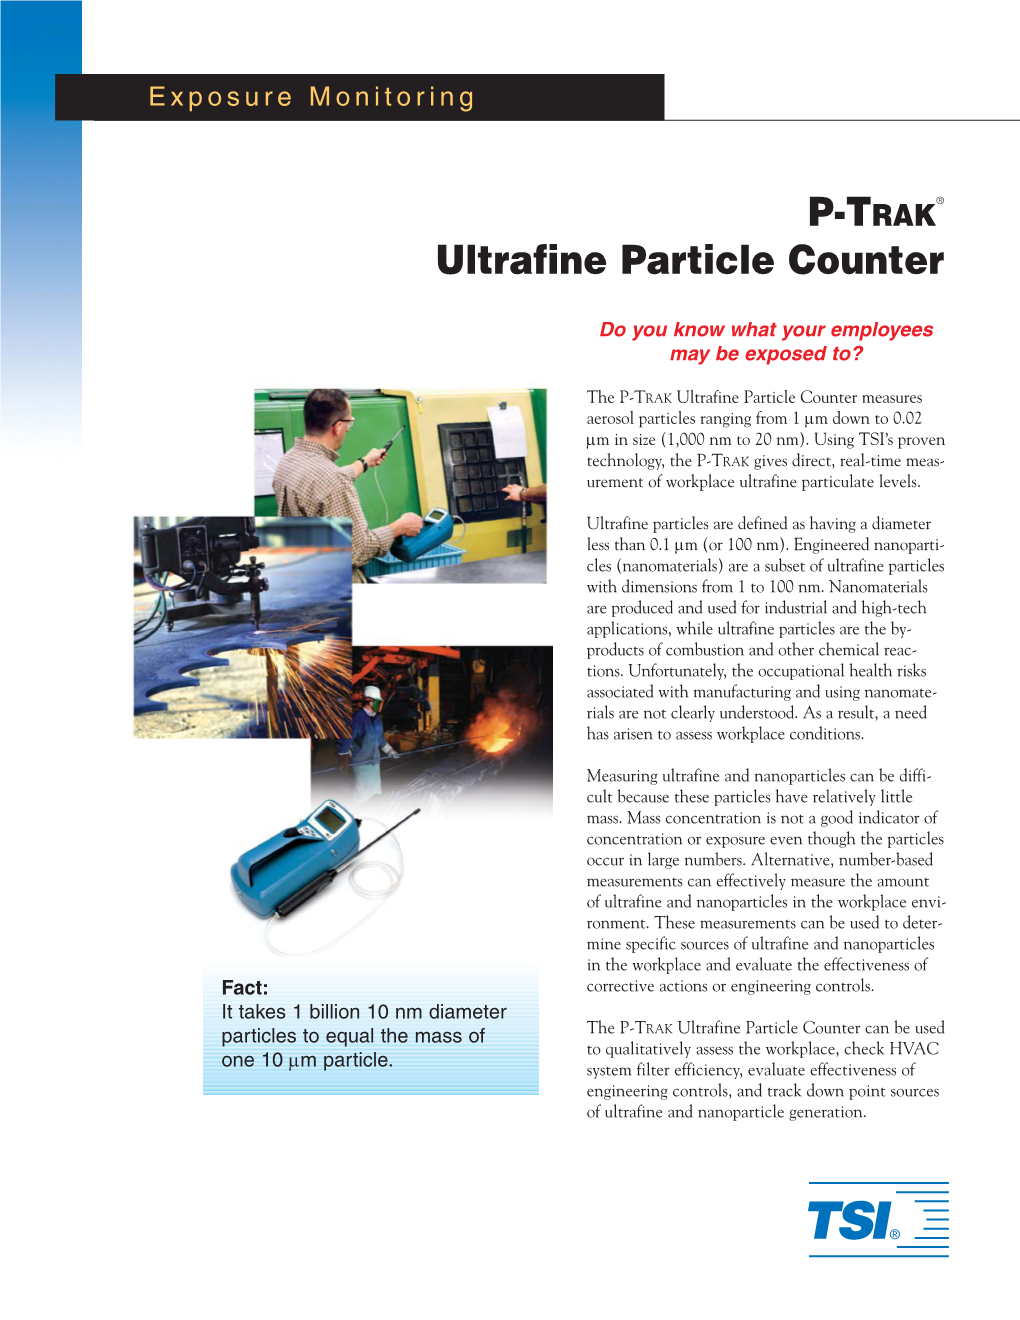 P-Trak Ultrafine Particle Counter Specification Sheet